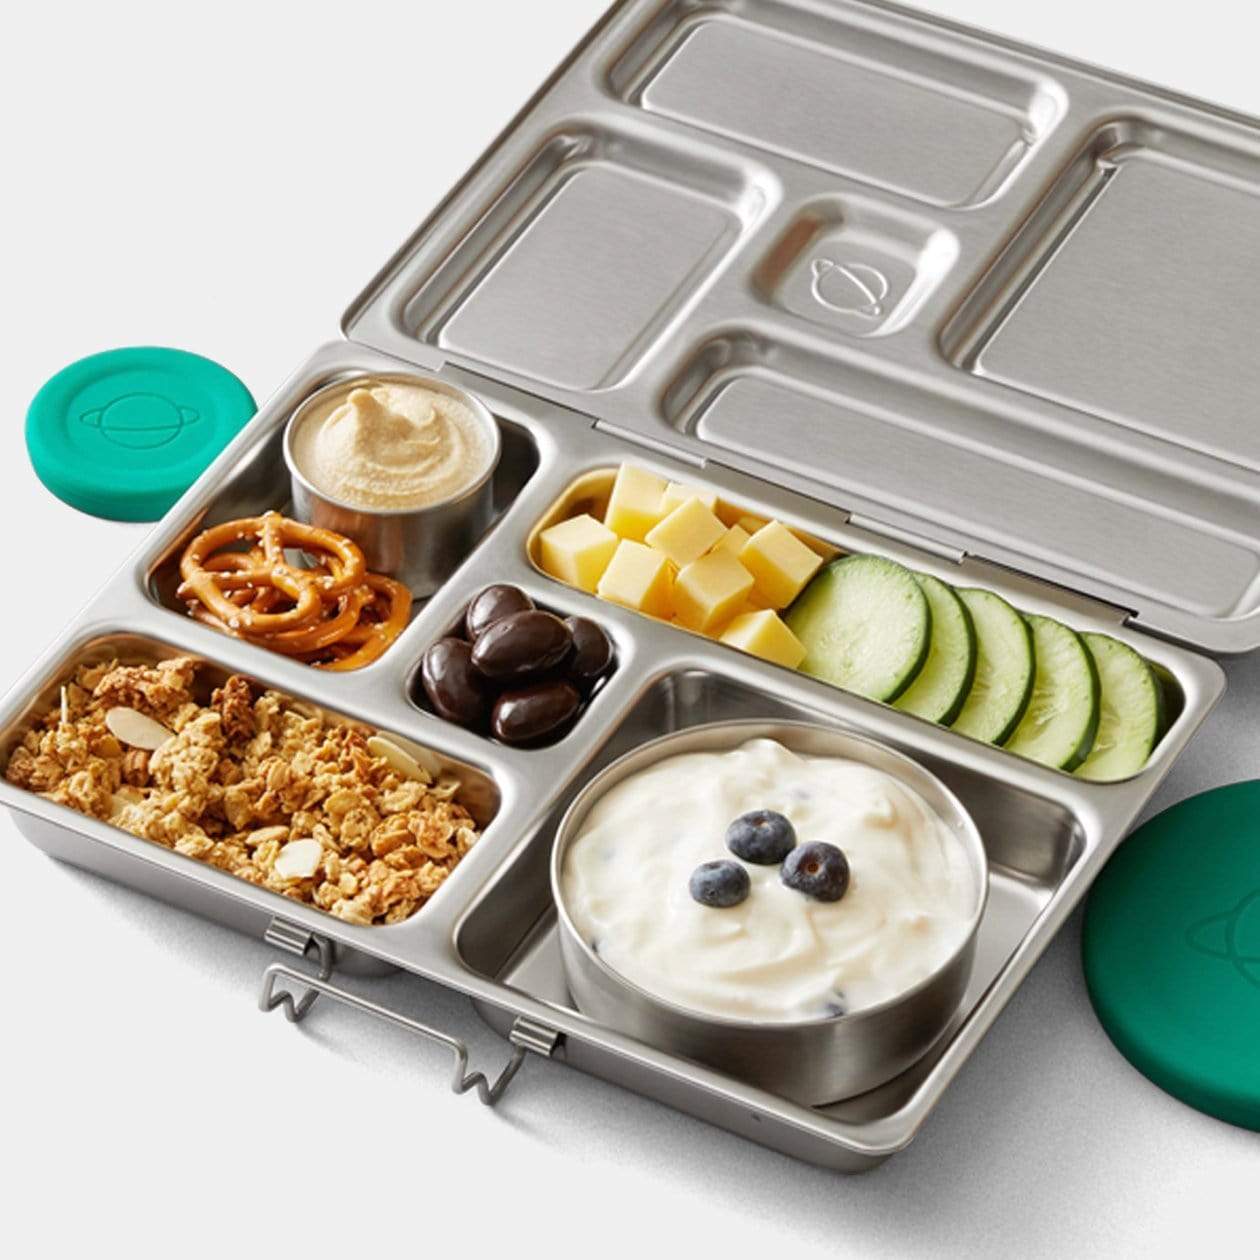 Kids' Lunch Containers - My Picks - Today's Mama